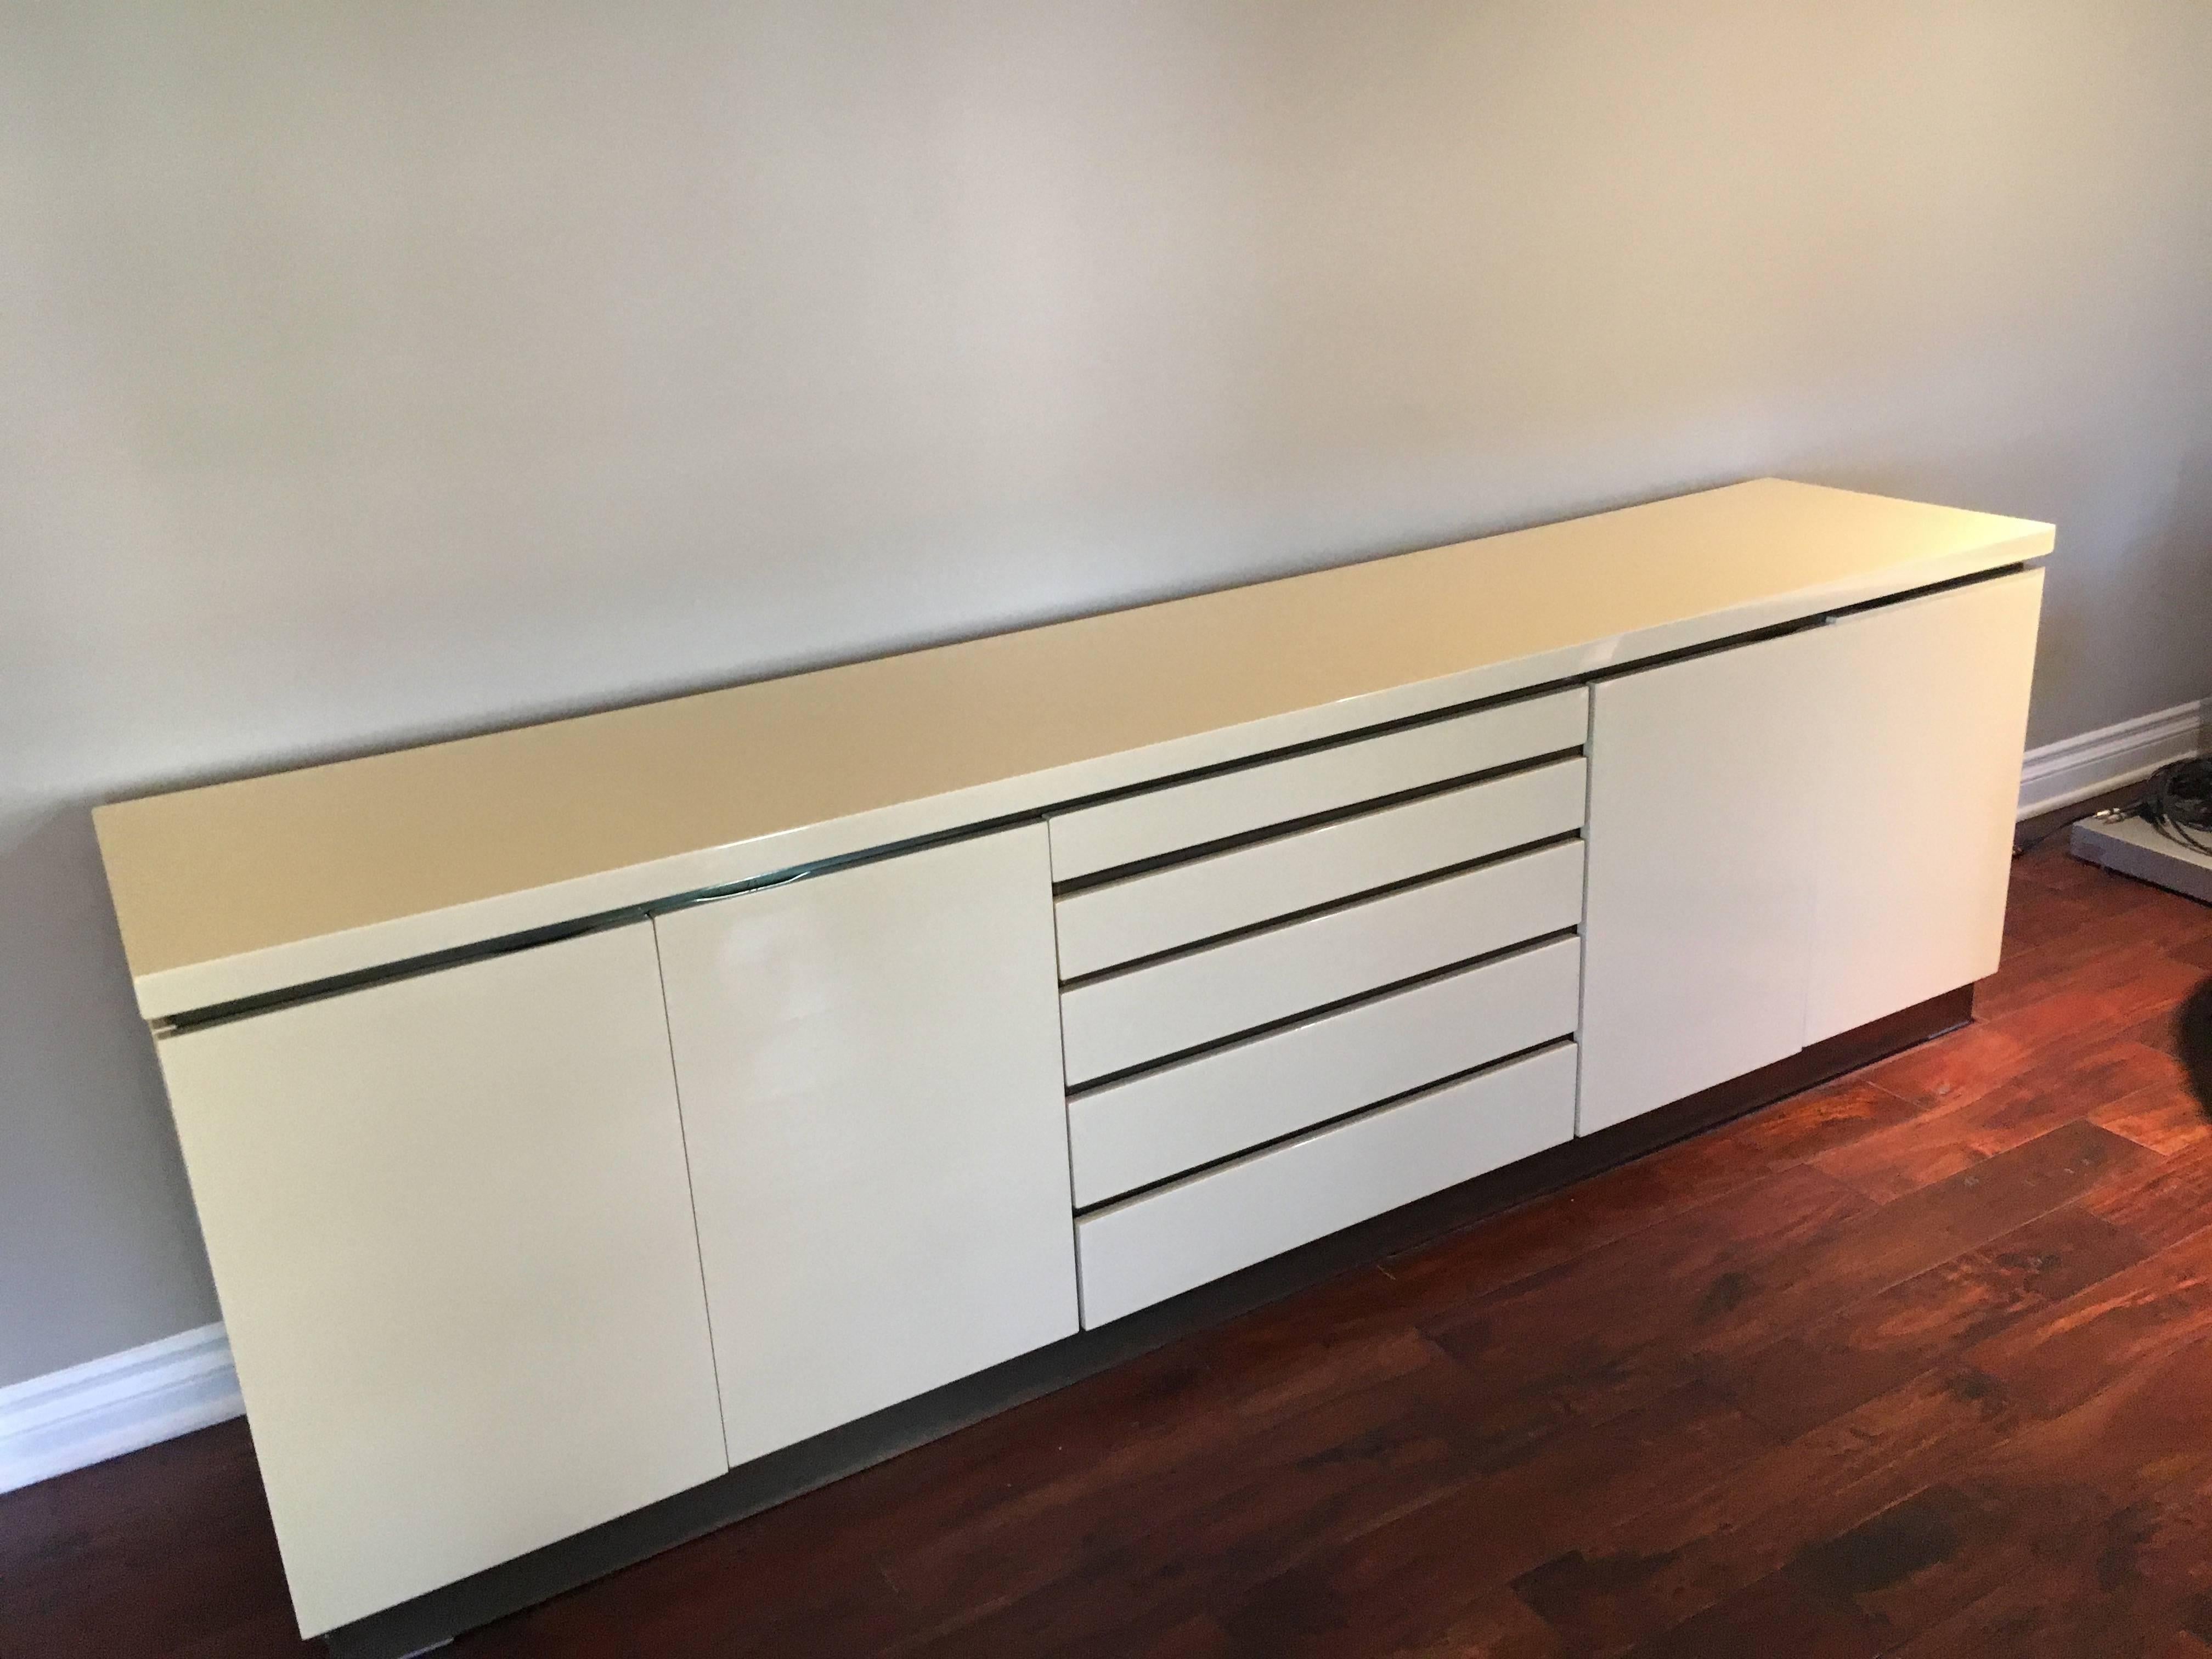 Credenza dresser in the Manner of Pierre Cardin - a lovely bone lacquered cabinet with 5 drawers center and two shelves behind doors on opposing sides of drawers. The piece could easily work as a dresser or a console or credenza - for entertainment